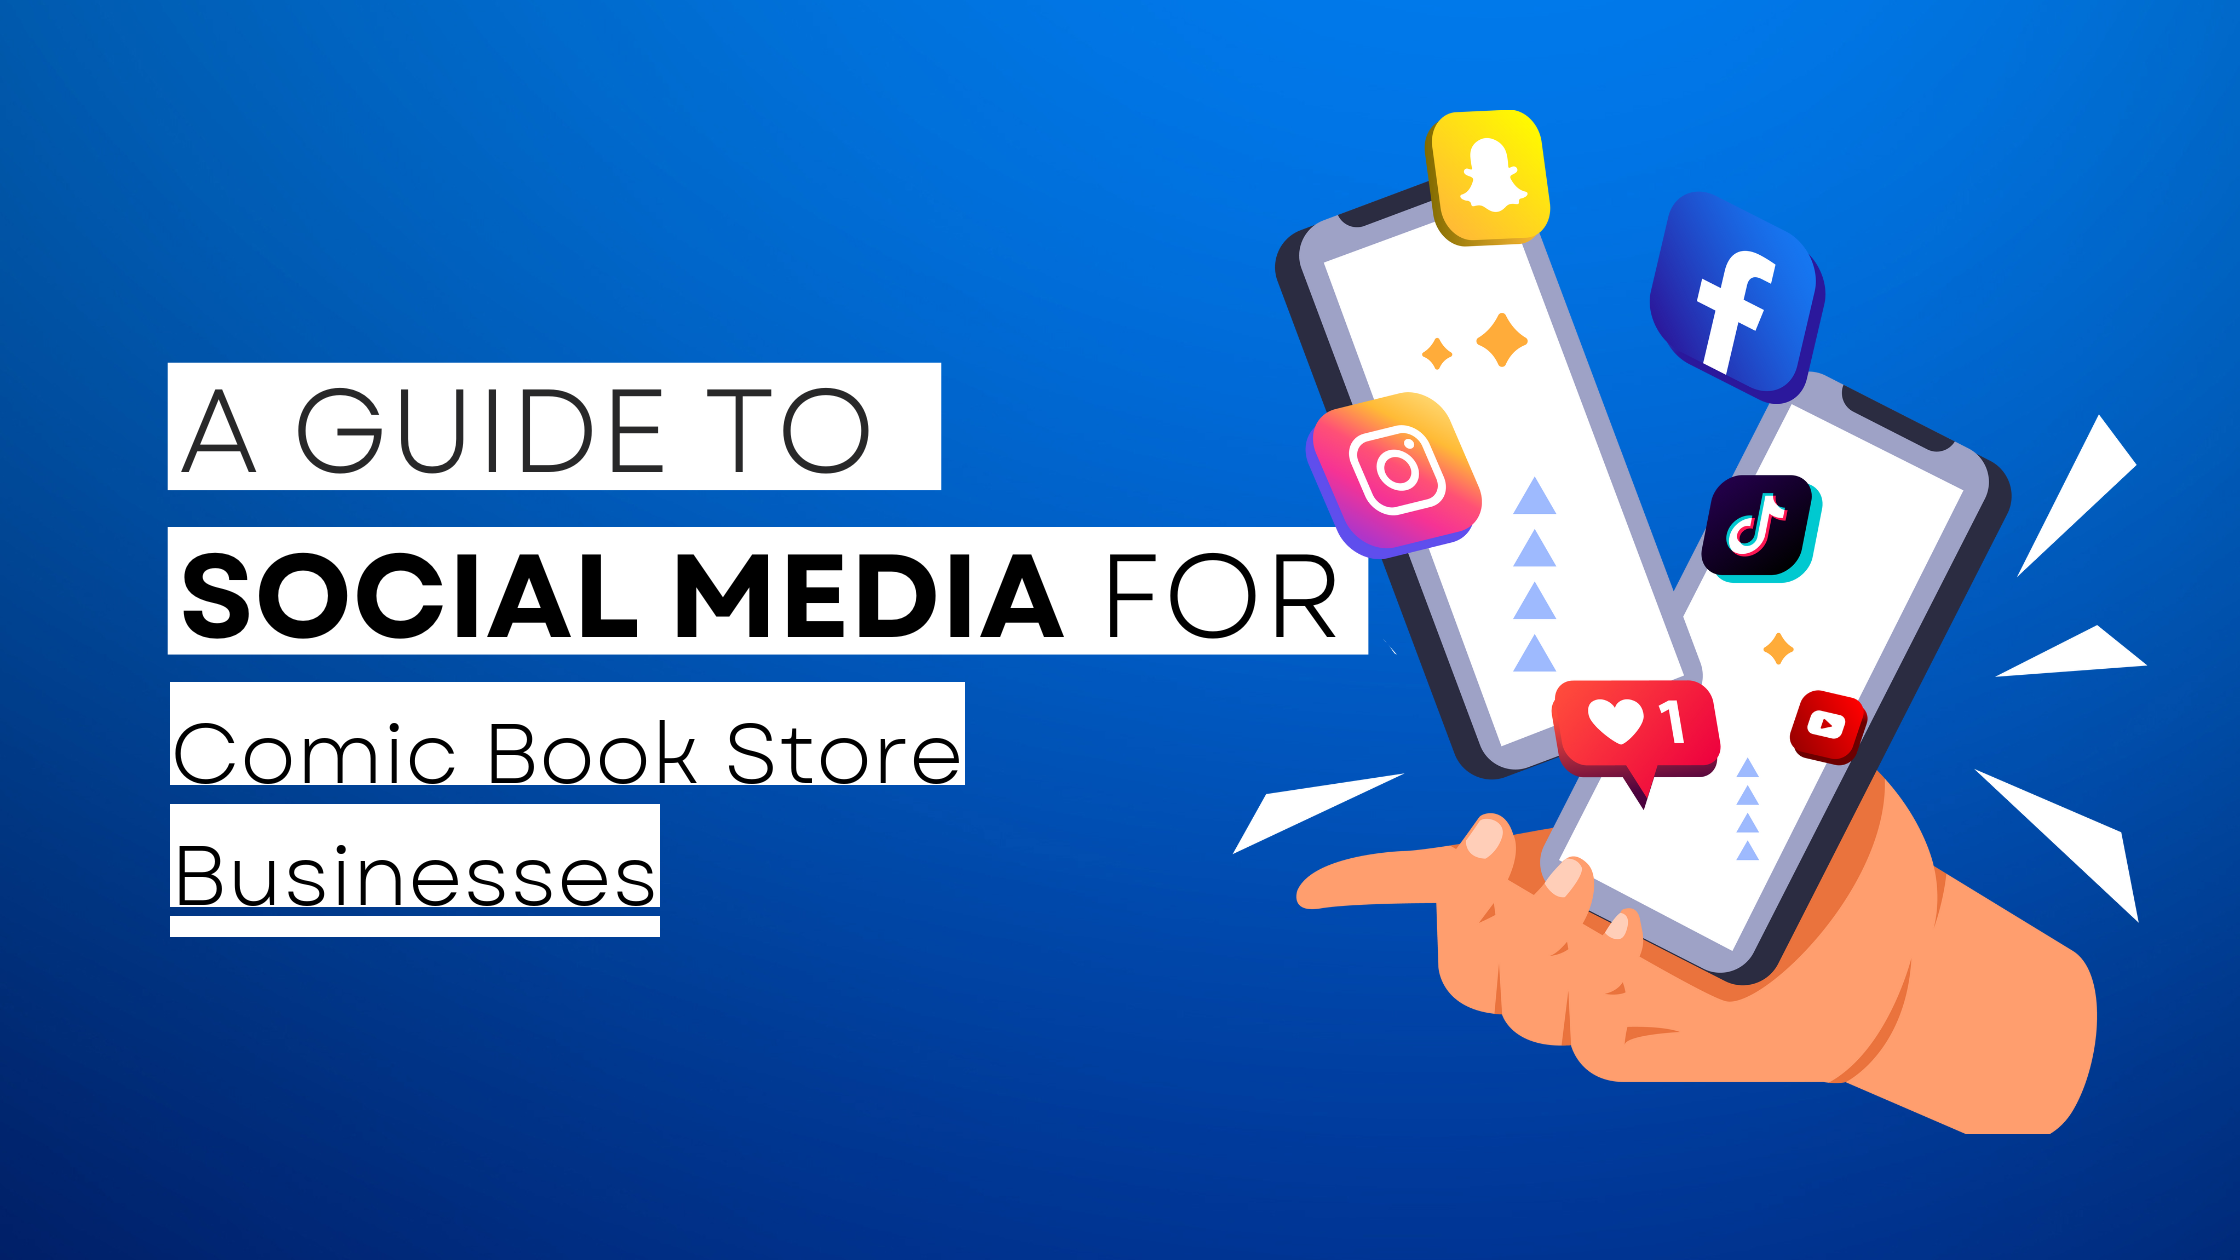 How to start Comic Book Store on social media